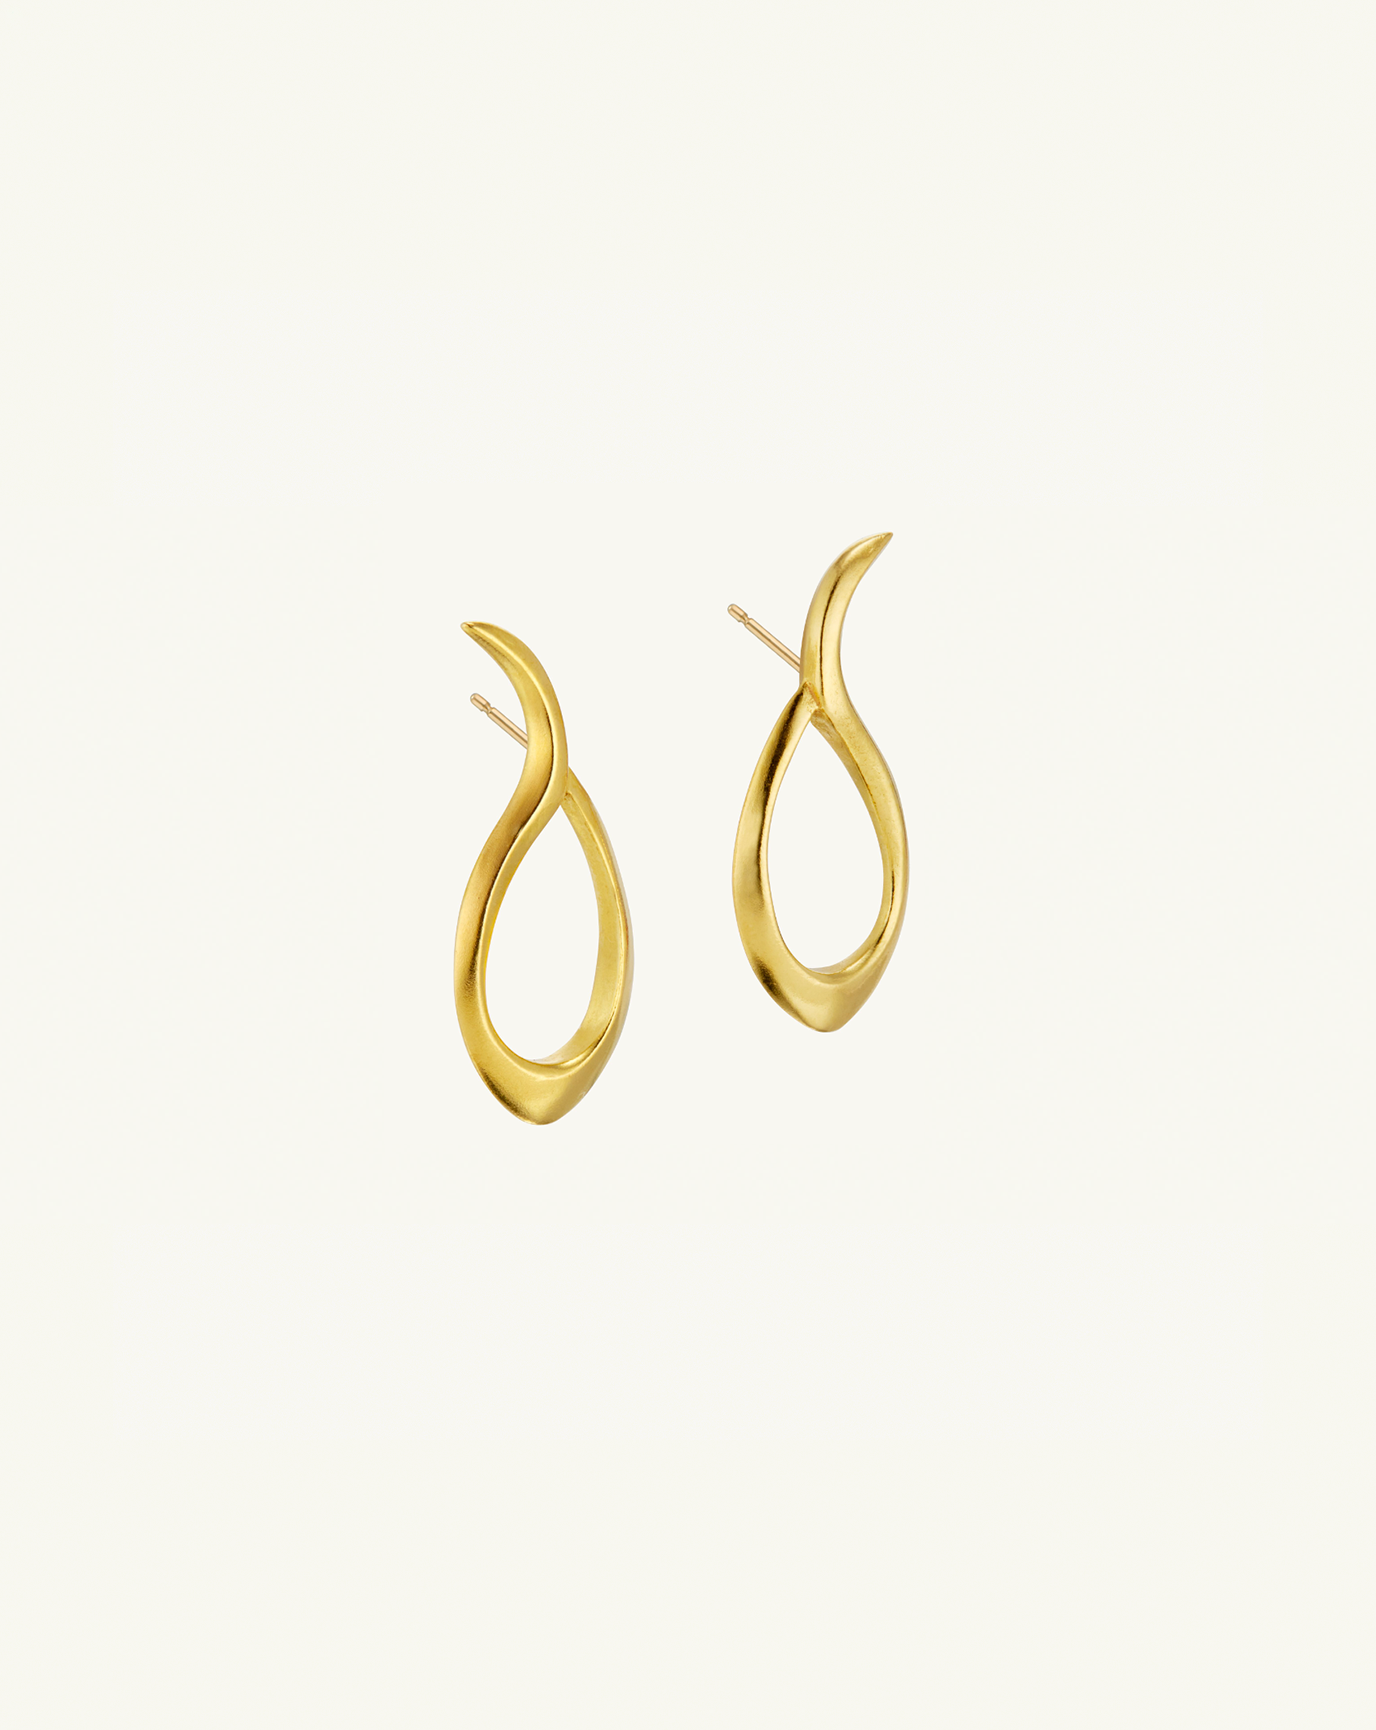 Product image of the smaller sculptural earrings